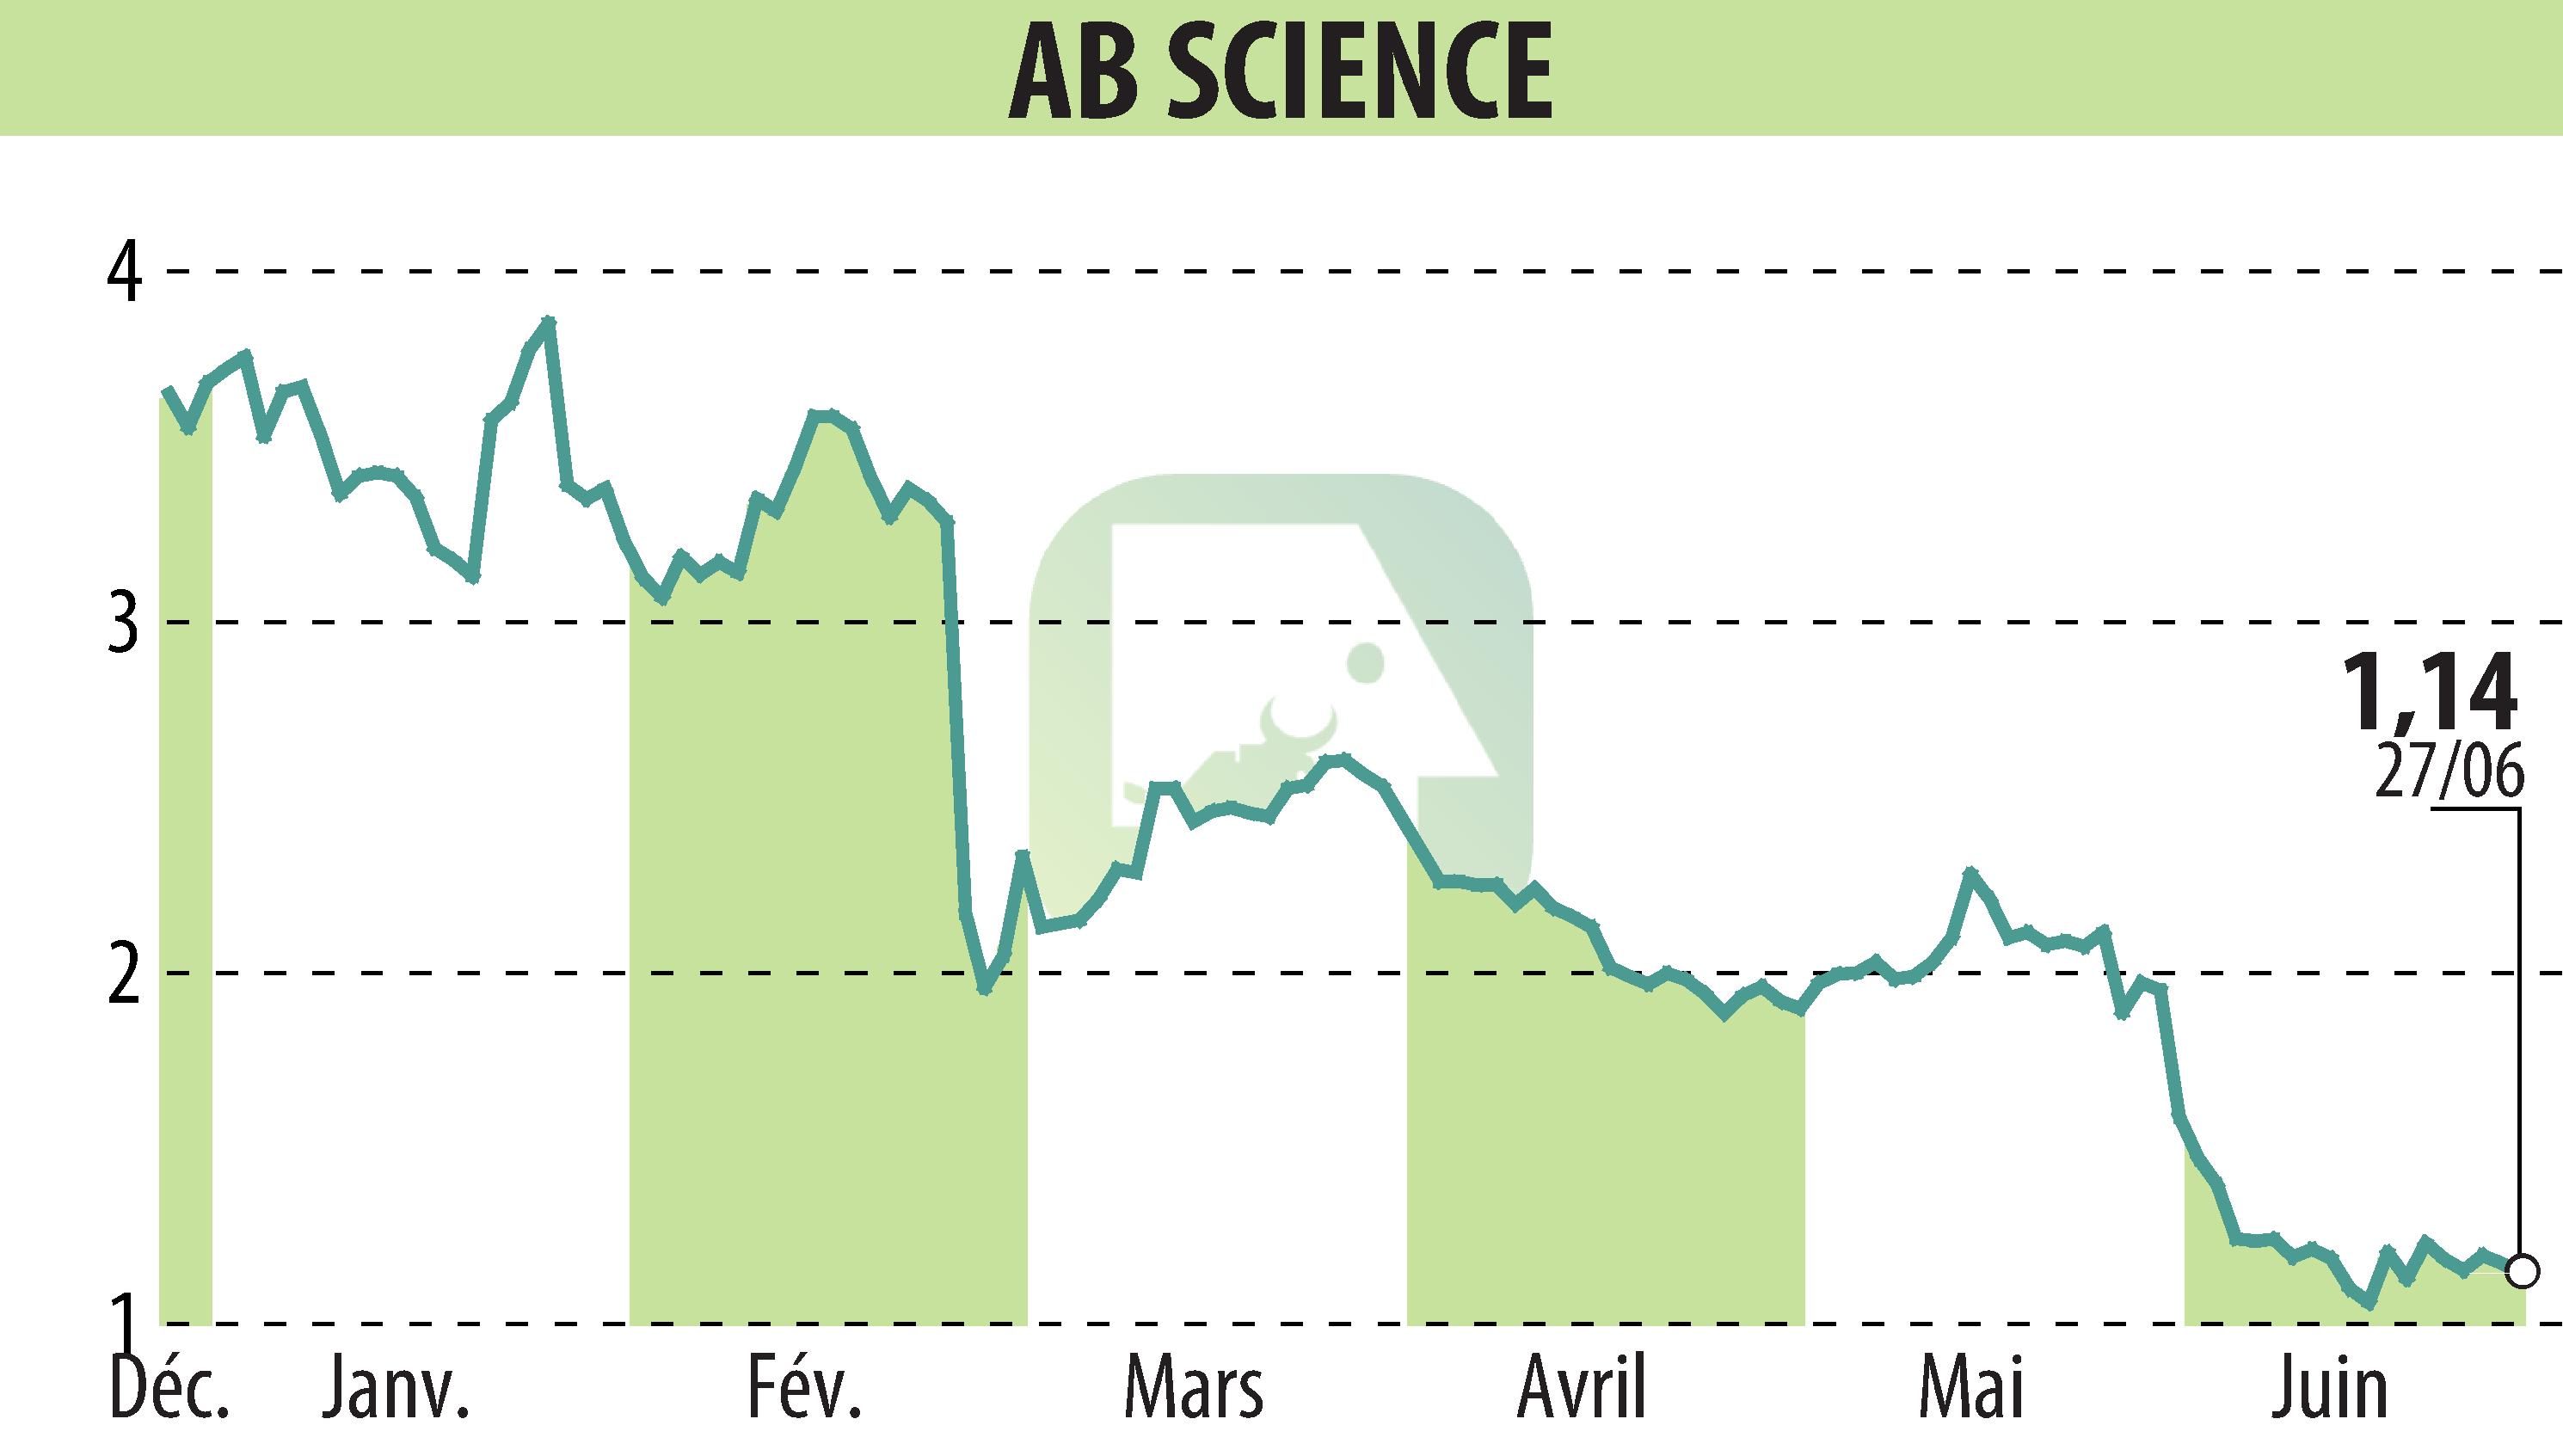 Stock price chart of ABSCIENCES (EPA:AB) showing fluctuations.